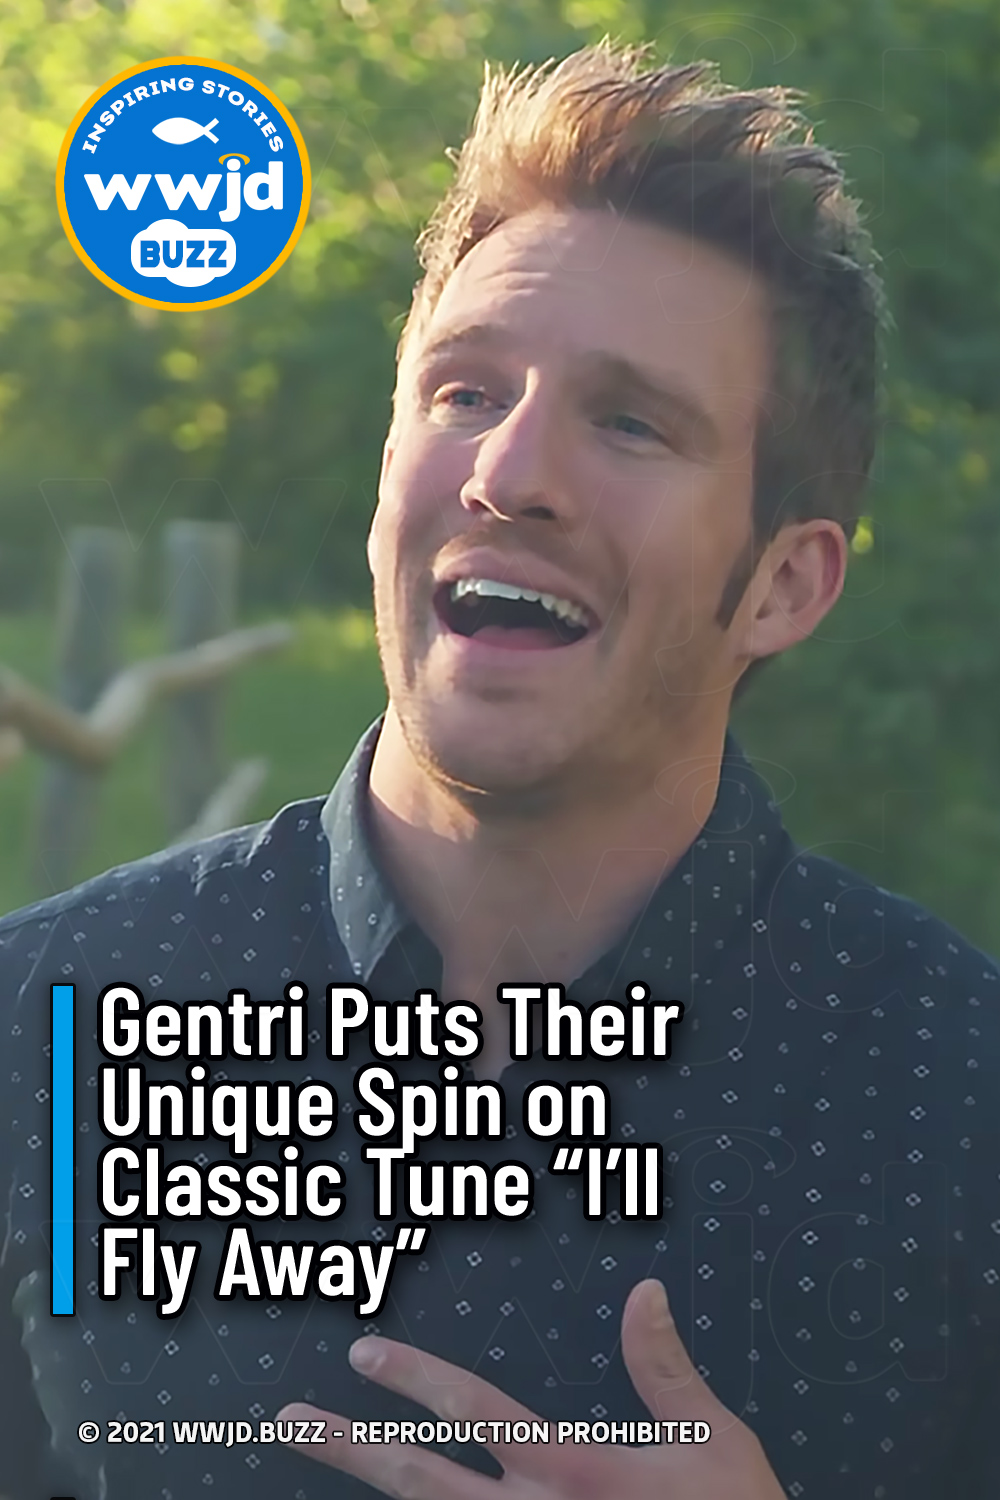 Gentri Puts Their Unique Spin on Classic Tune “I’ll Fly Away”